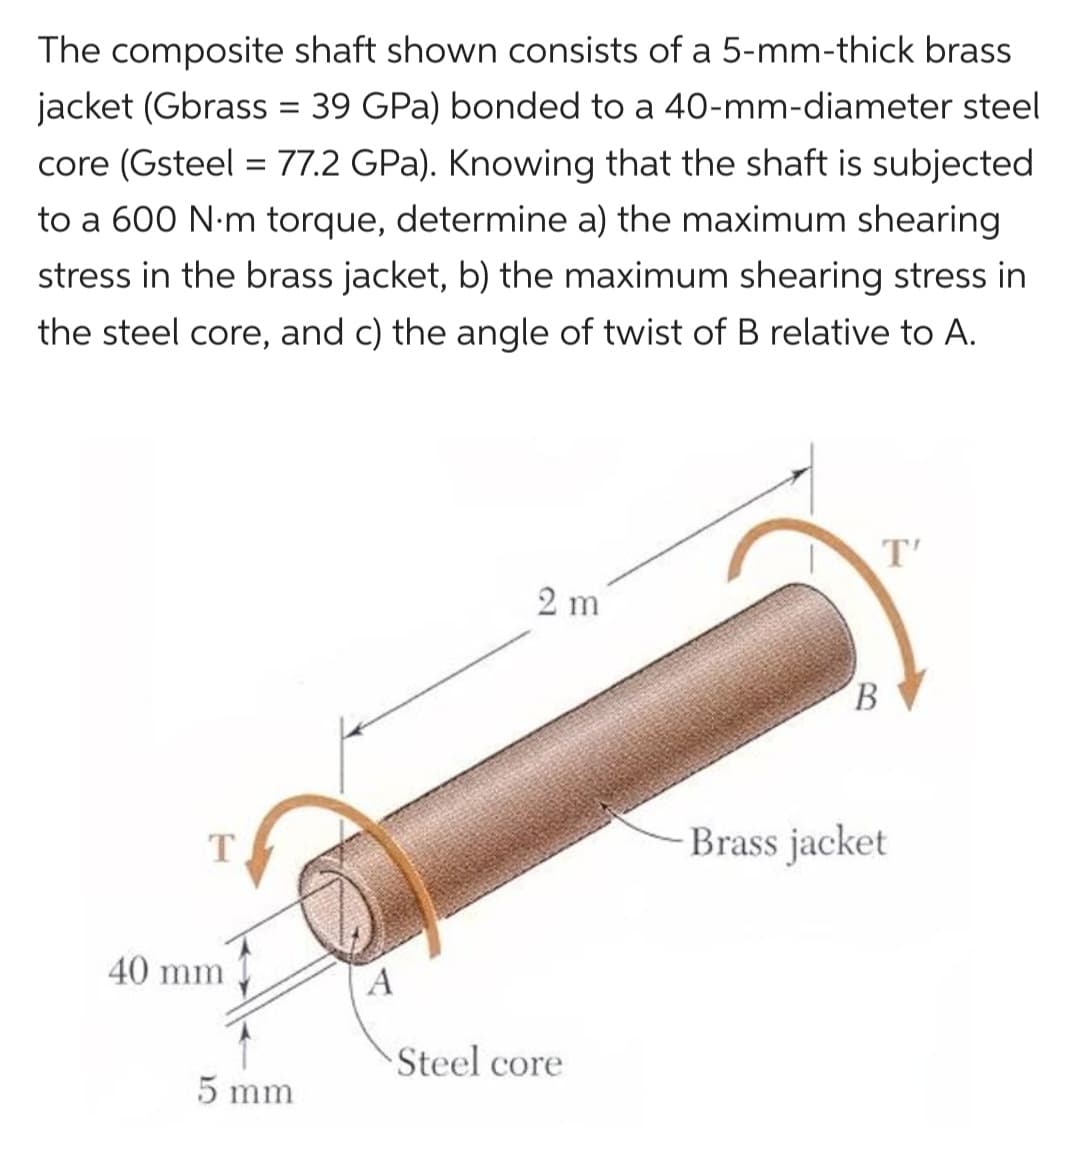 The composite shaft shown consists of a 5-mm-thick brass
jacket (Gbrass = 39 GPa) bonded to a 40-mm-diameter steel
core (Gsteel = 77.2 GPa). Knowing that the shaft is subjected
to a 600 N·m torque, determine a) the maximum shearing
stress in the brass jacket, b) the maximum shearing stress in
the steel core, and c) the angle of twist of B relative to A.
T
40 mm
5 mm
A
2 m
Steel core
T'
B
Brass jacket